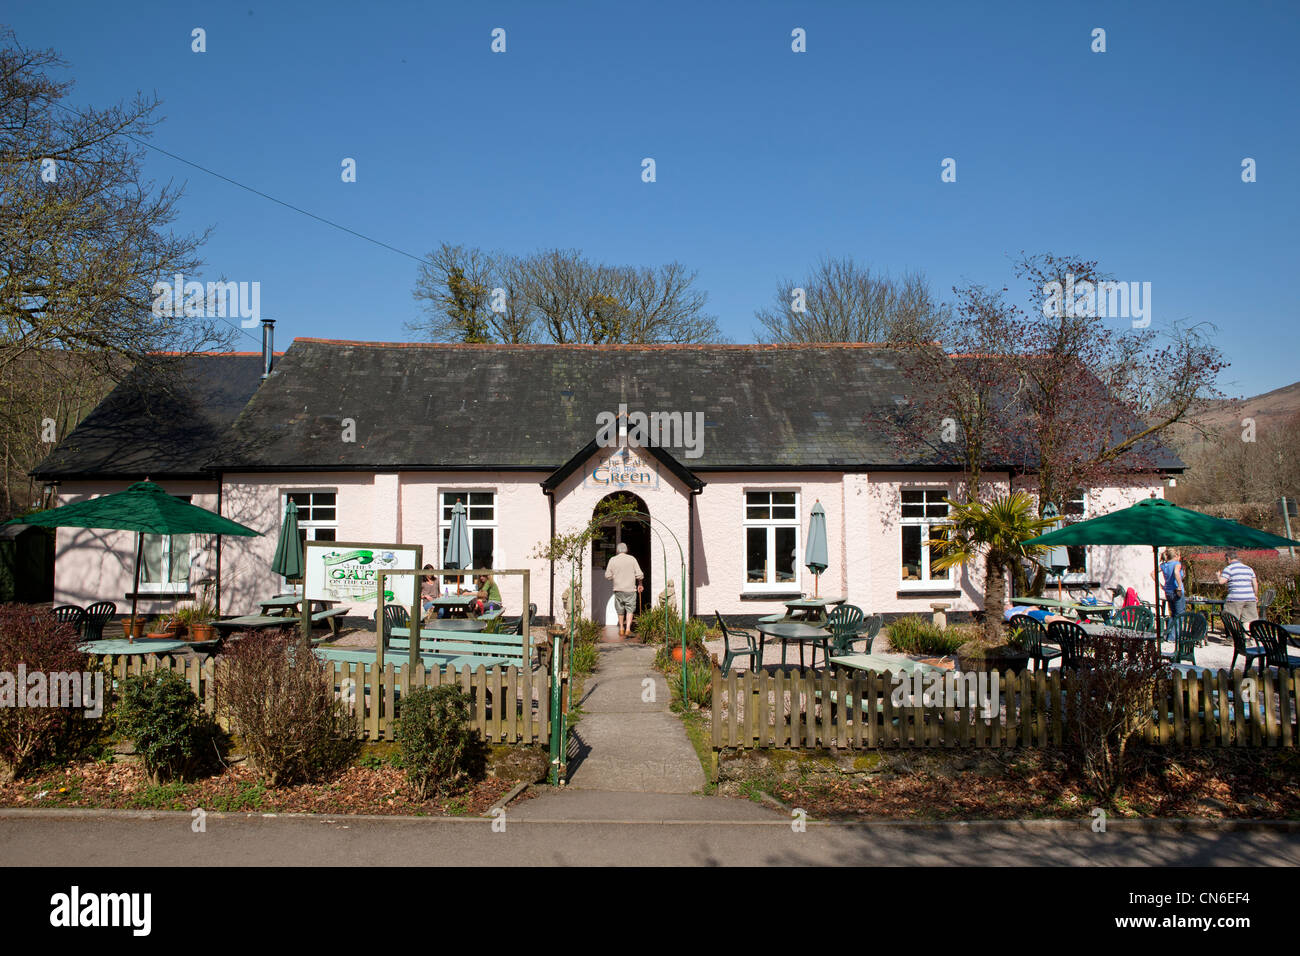 The Cafe on the Green. Widecombe-in-the-moor, Dartmoor, England. Stock Photo